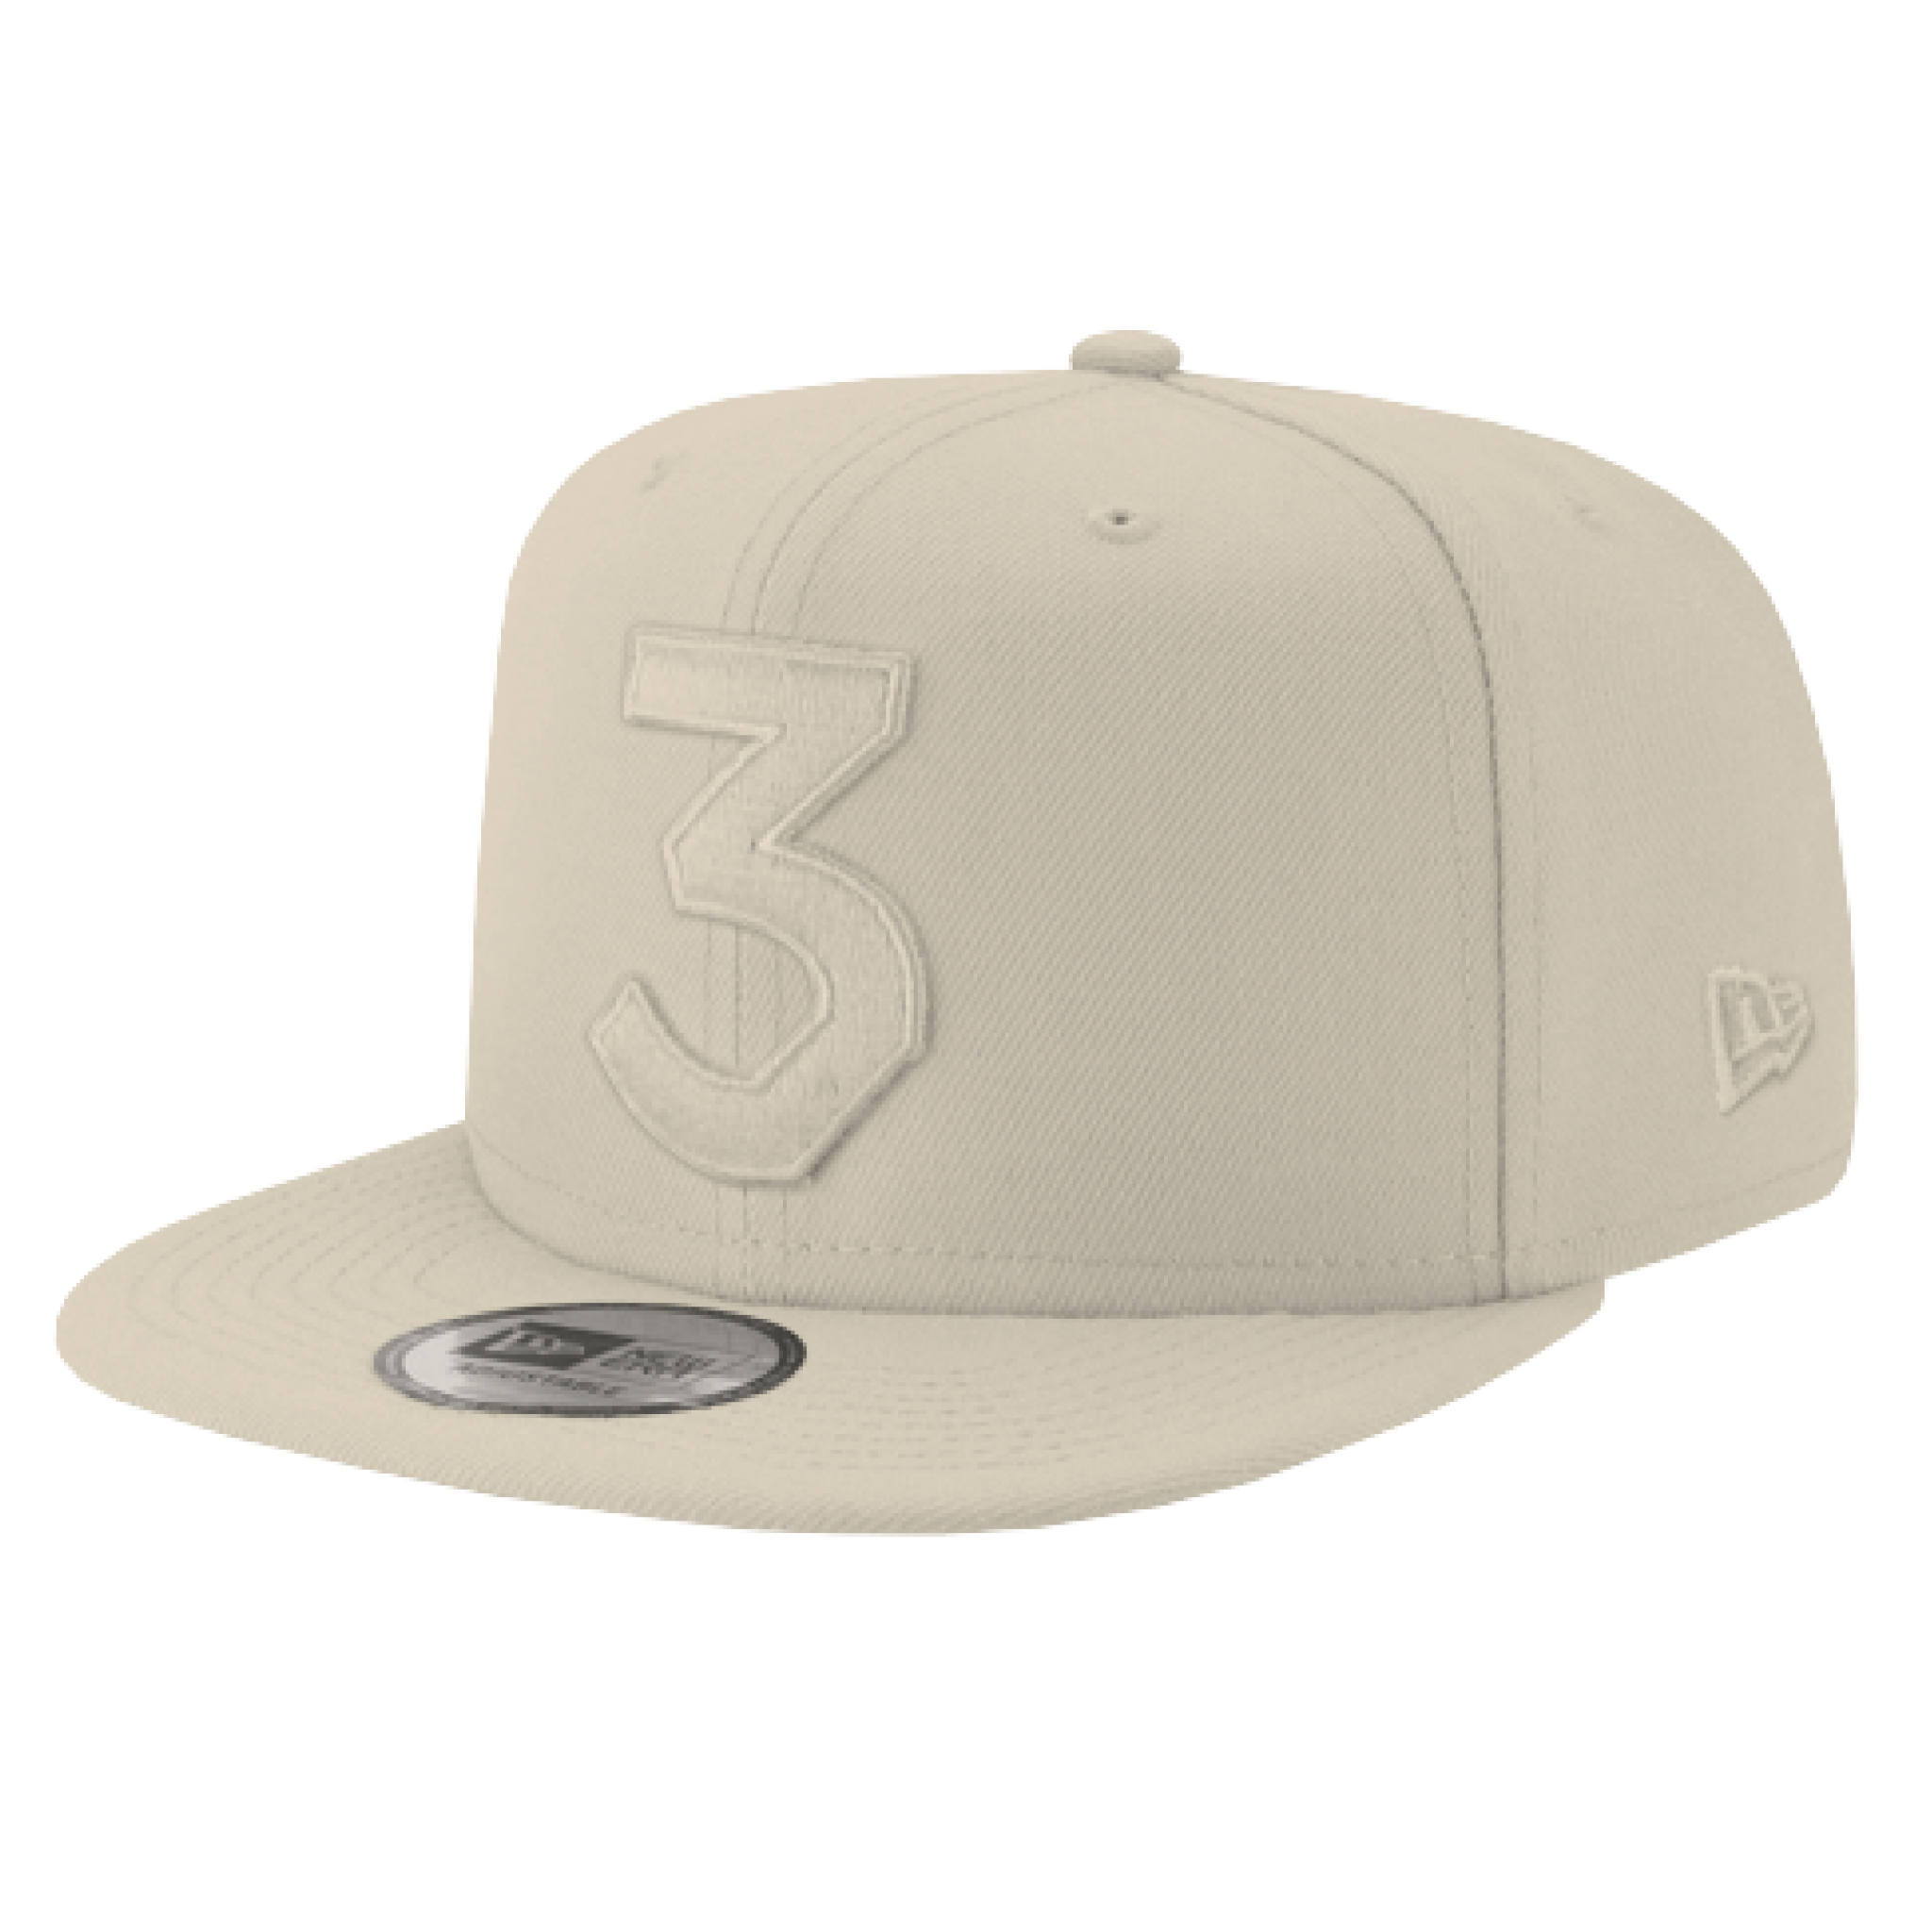 bad Vliegveld Voorstad Chance 3 New Era Ivory/Ivory Hat – Chance the Rapper Official